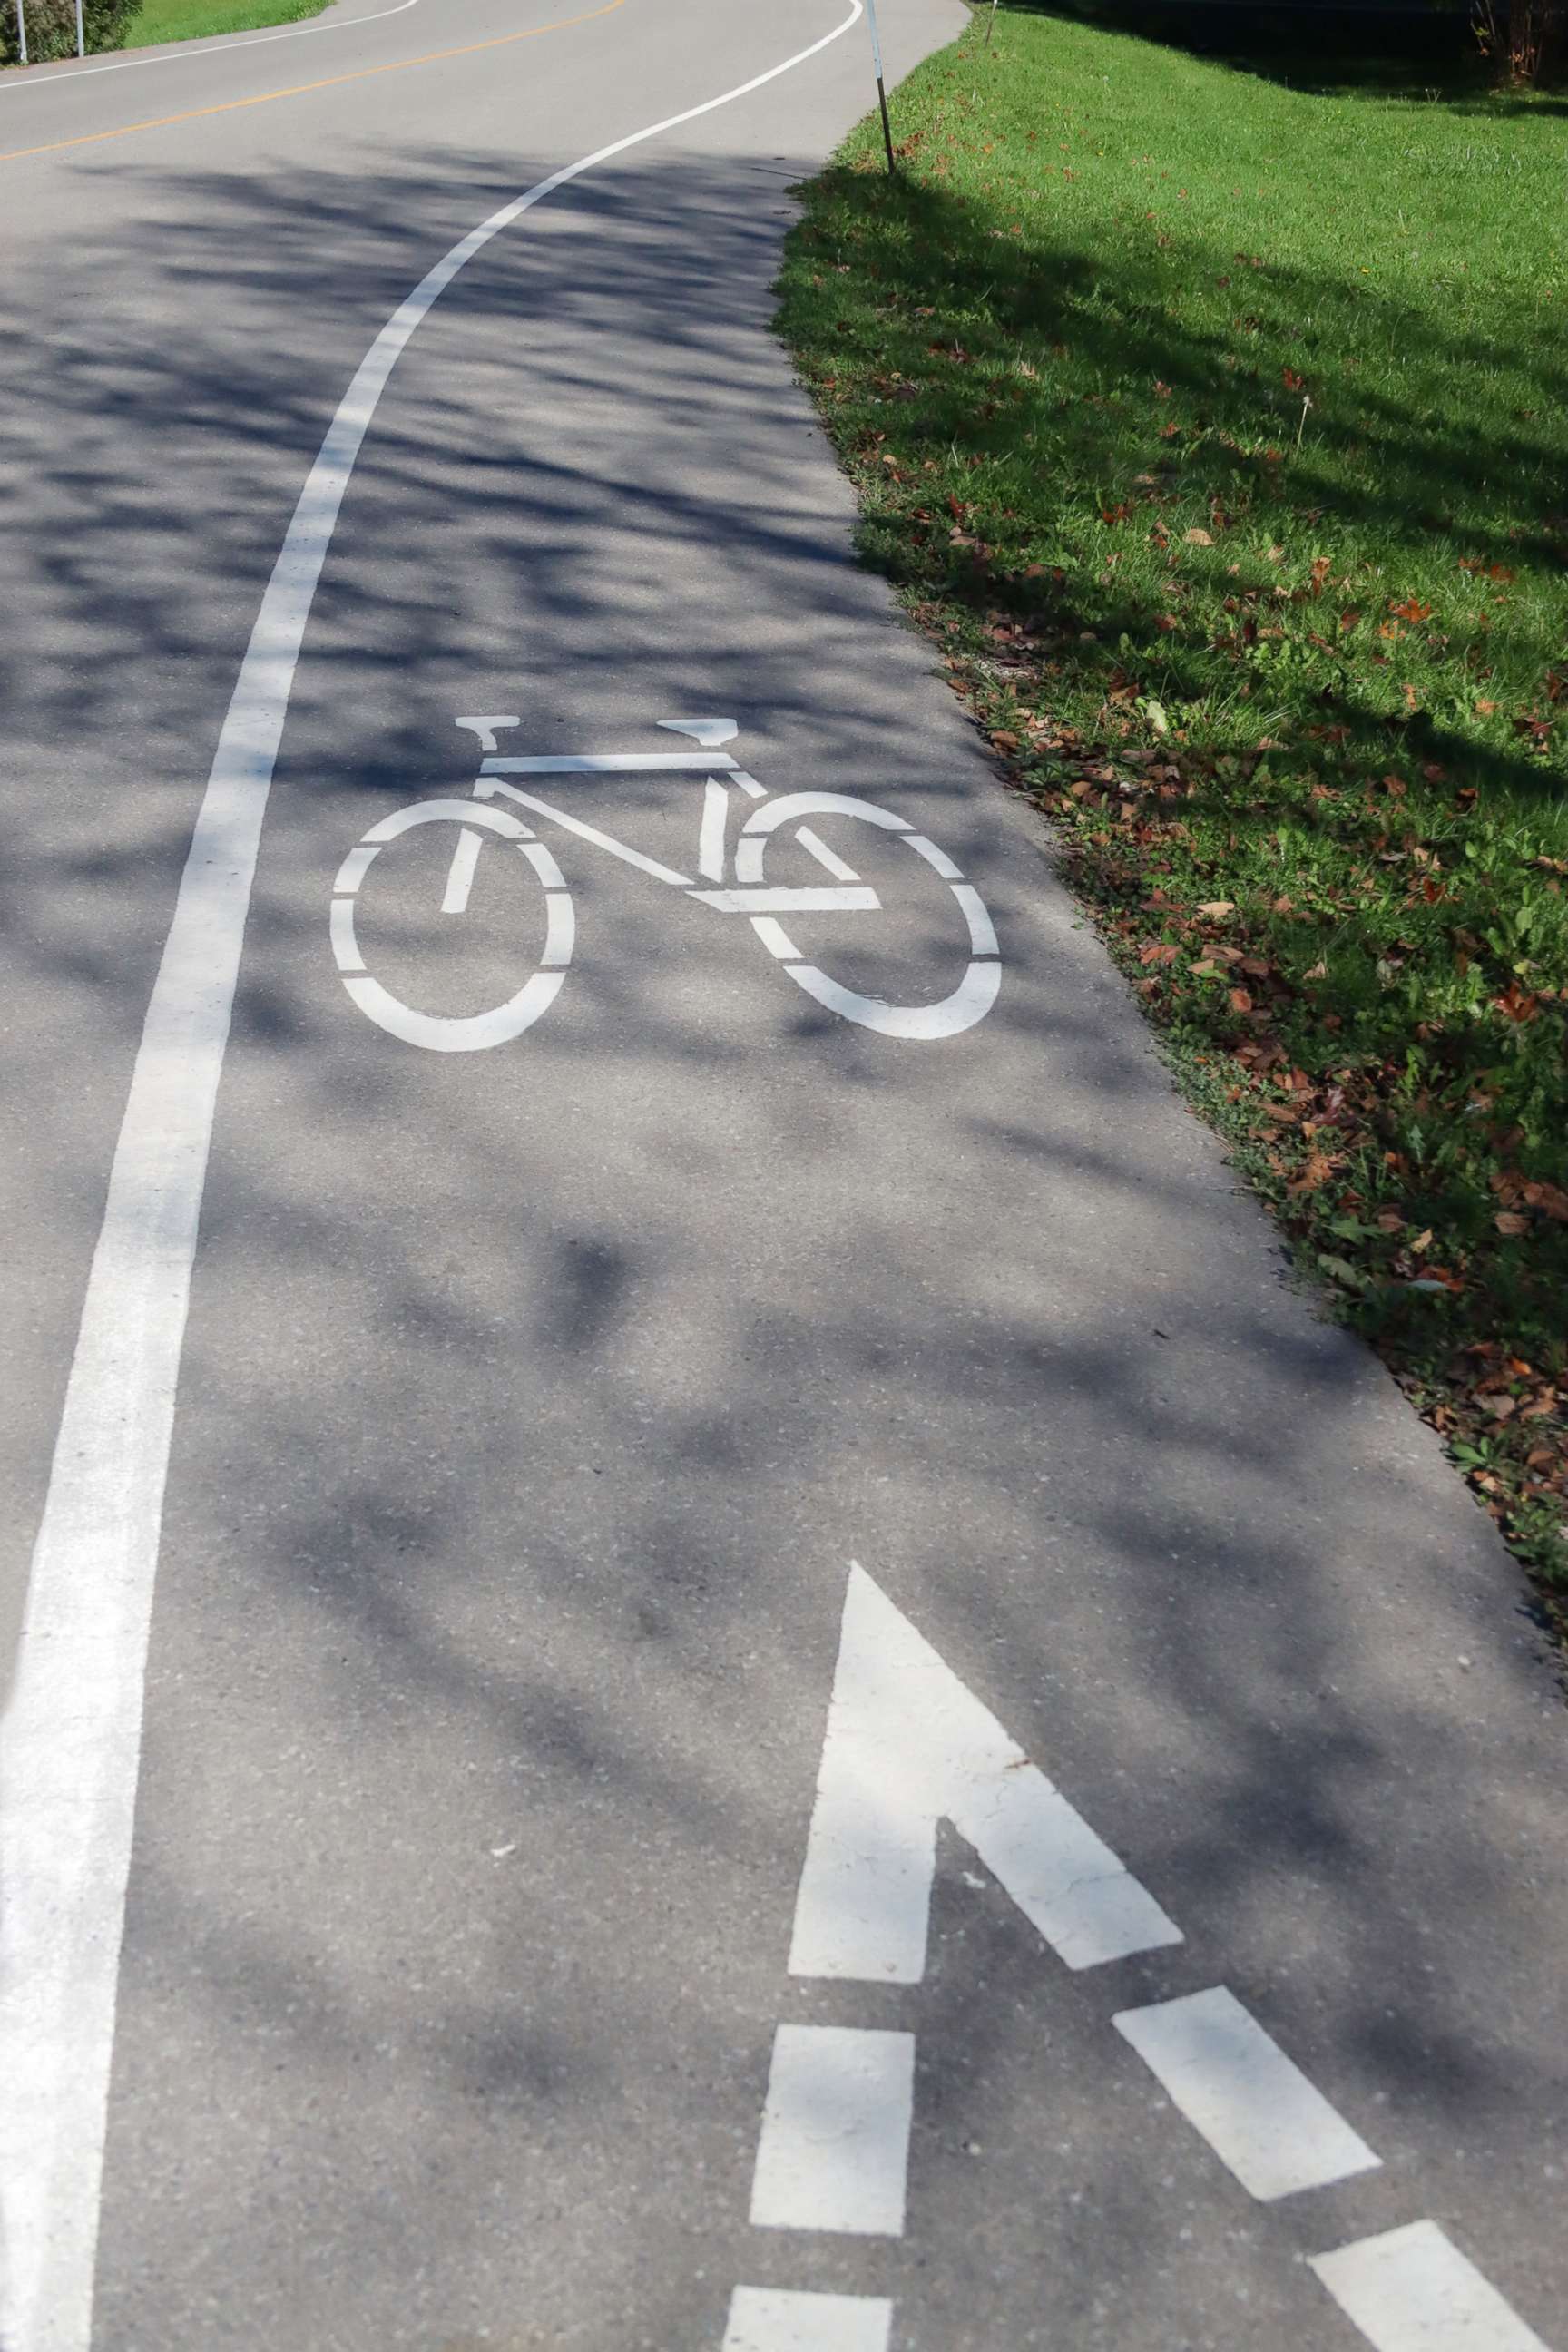 PHOTO: A bike lane decal is painted on the roadside indicating a Bike only zone for road safety.